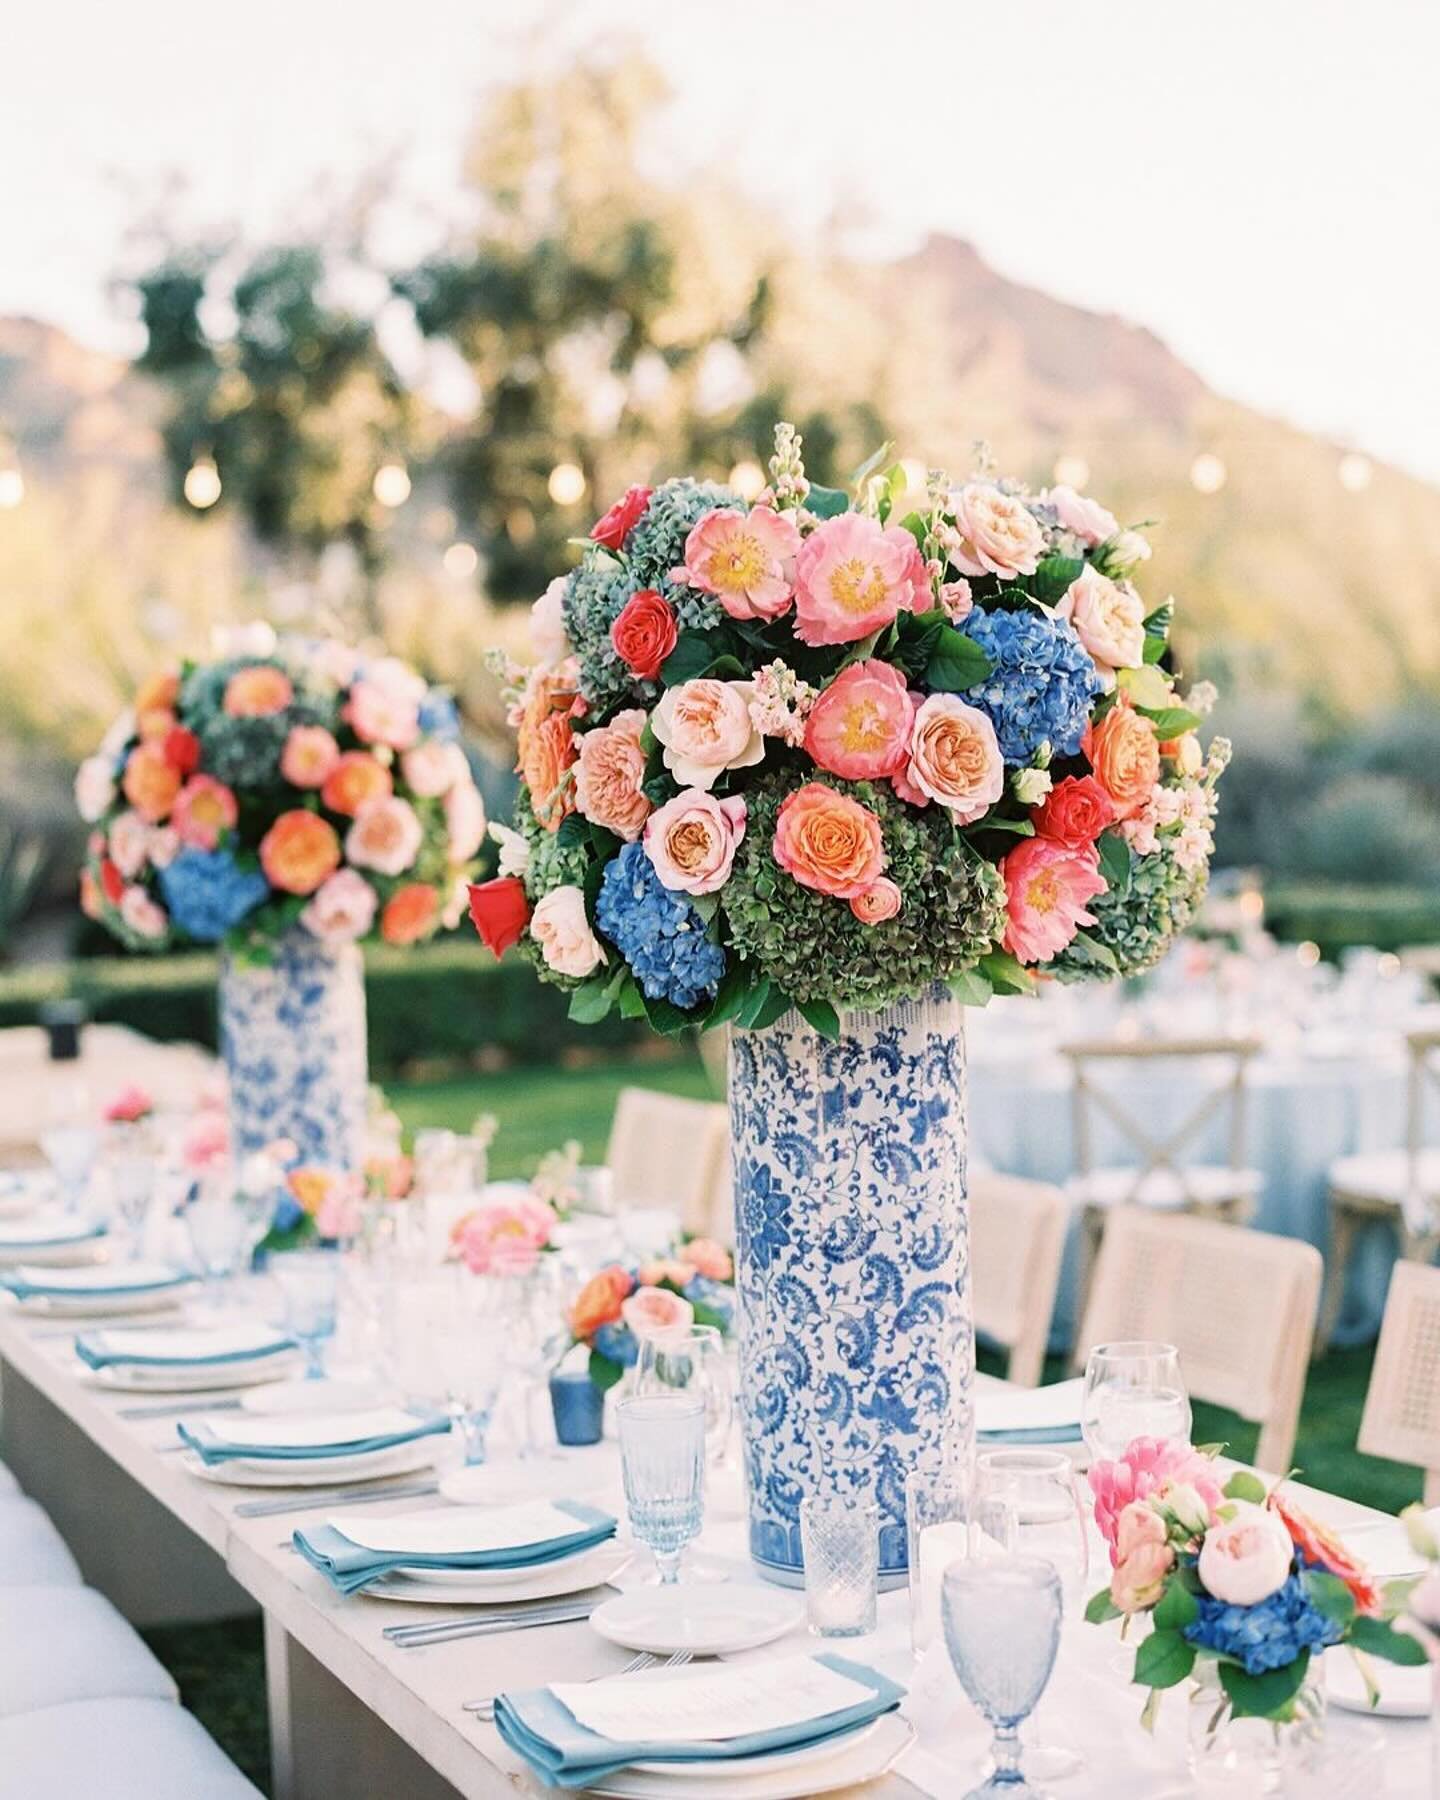 Take a look at all the amazing colors in this gorgeous floral display captured by @maryclaire_photography 🎞️